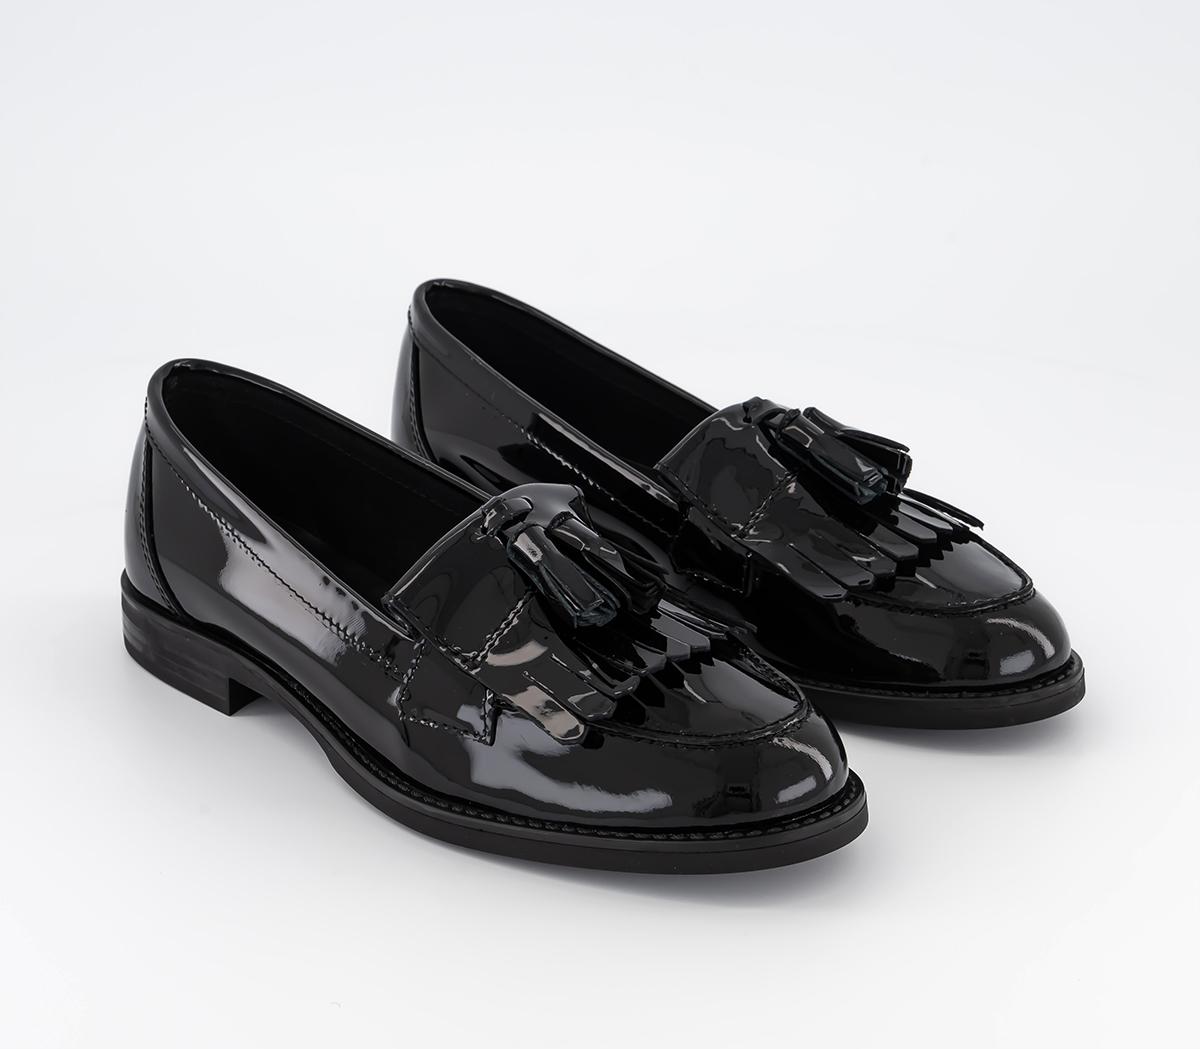 OFFICE Womens Fitz Tassle Fringe Loafers Black Patent Leather, 8